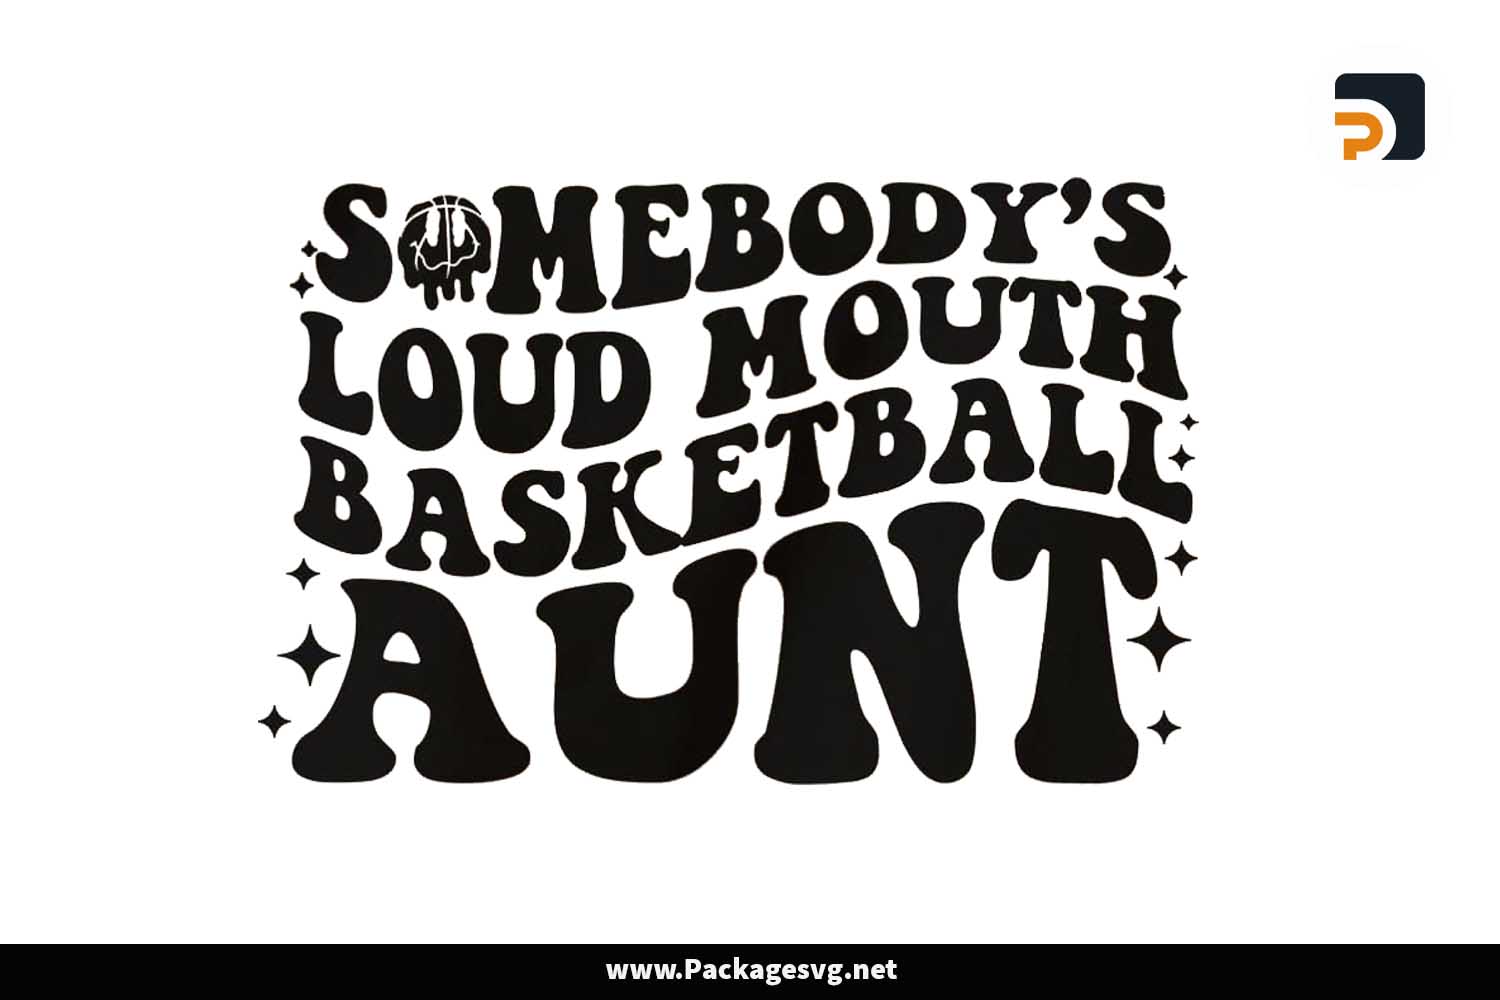 Somebody Loud Mouth Basketball Aunt SVG PNG EPS Digital Download LDXWAWB8|